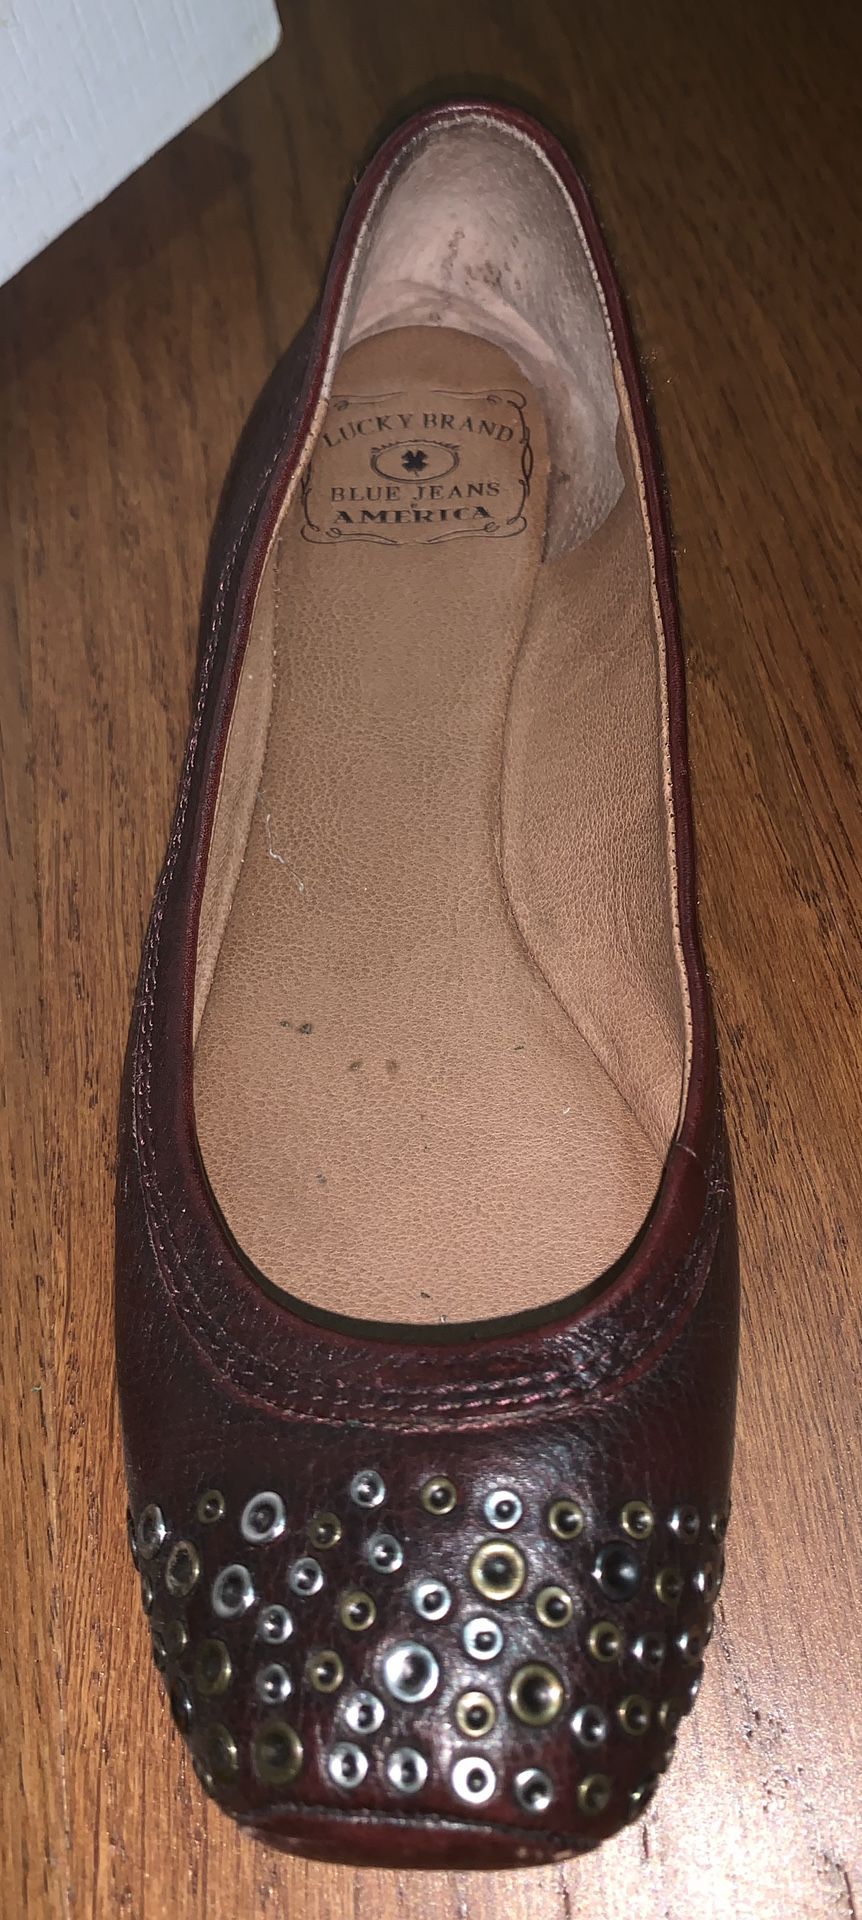 Lucky Brand Embellished Wine Leather Flats 7.5 M